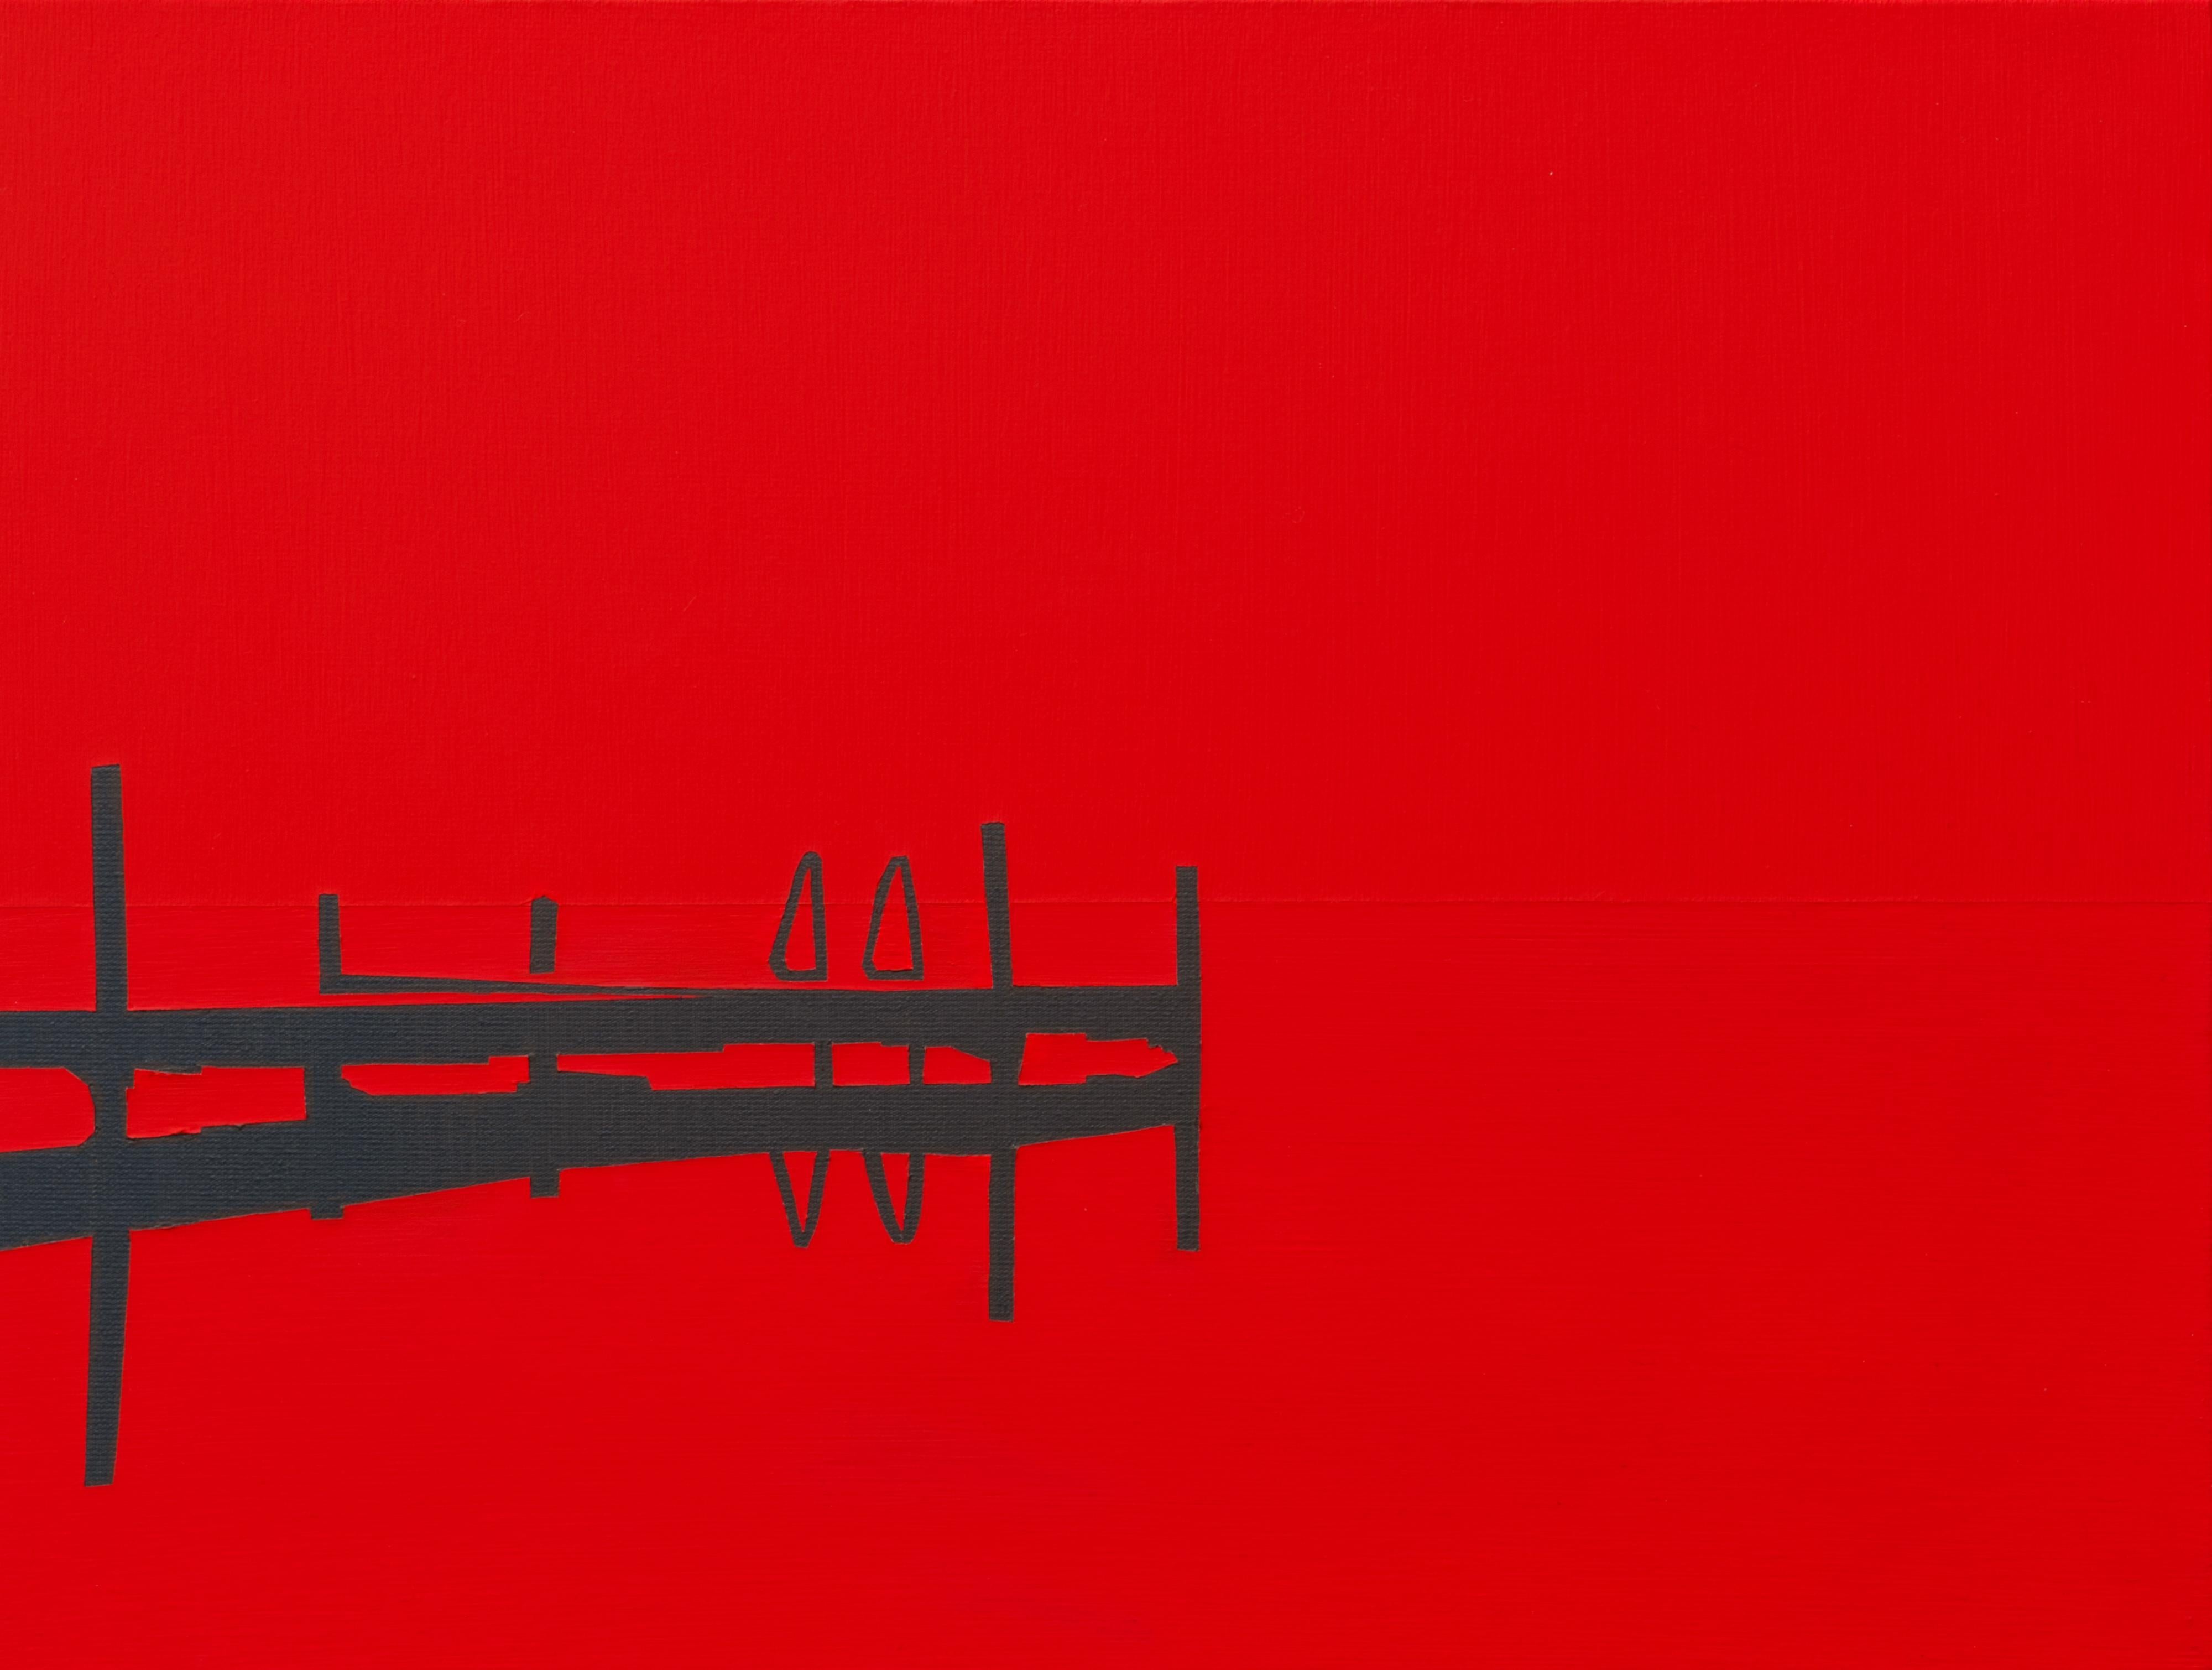 Jetty 12 August 20:14 - Modern Red Minimalistic Landscape Painting, See View 